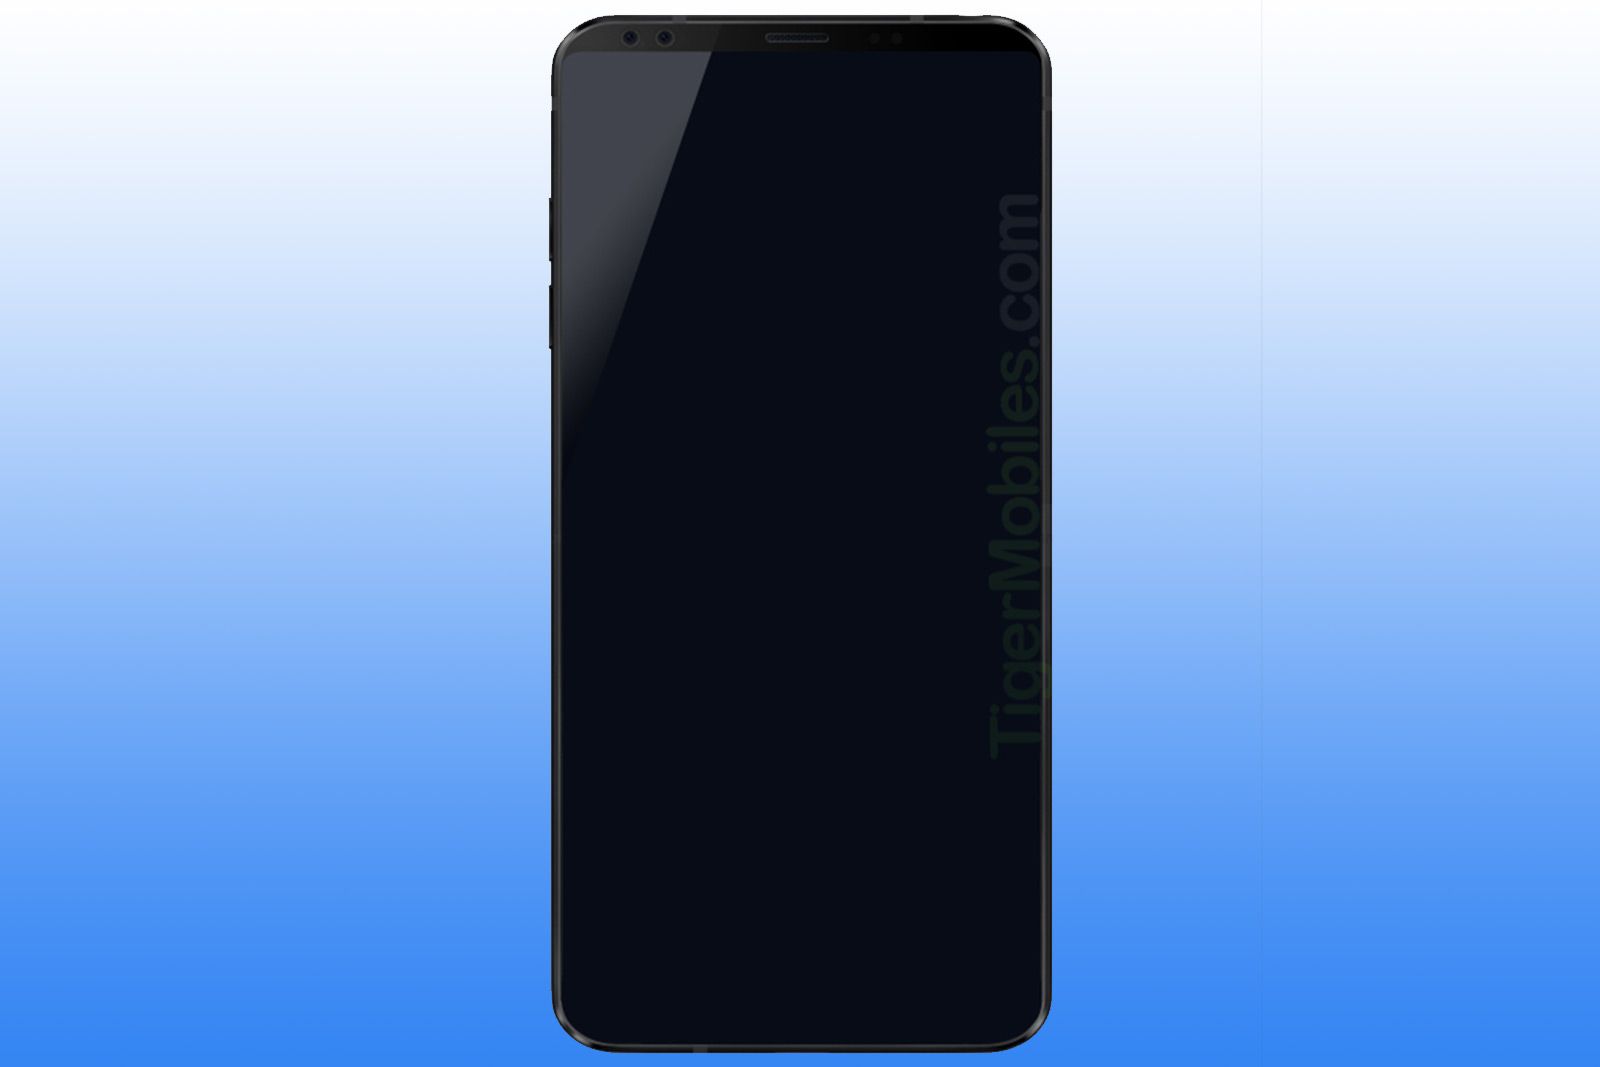 Leaked render of LG G7 shows a phone with virtually no bezels image 1